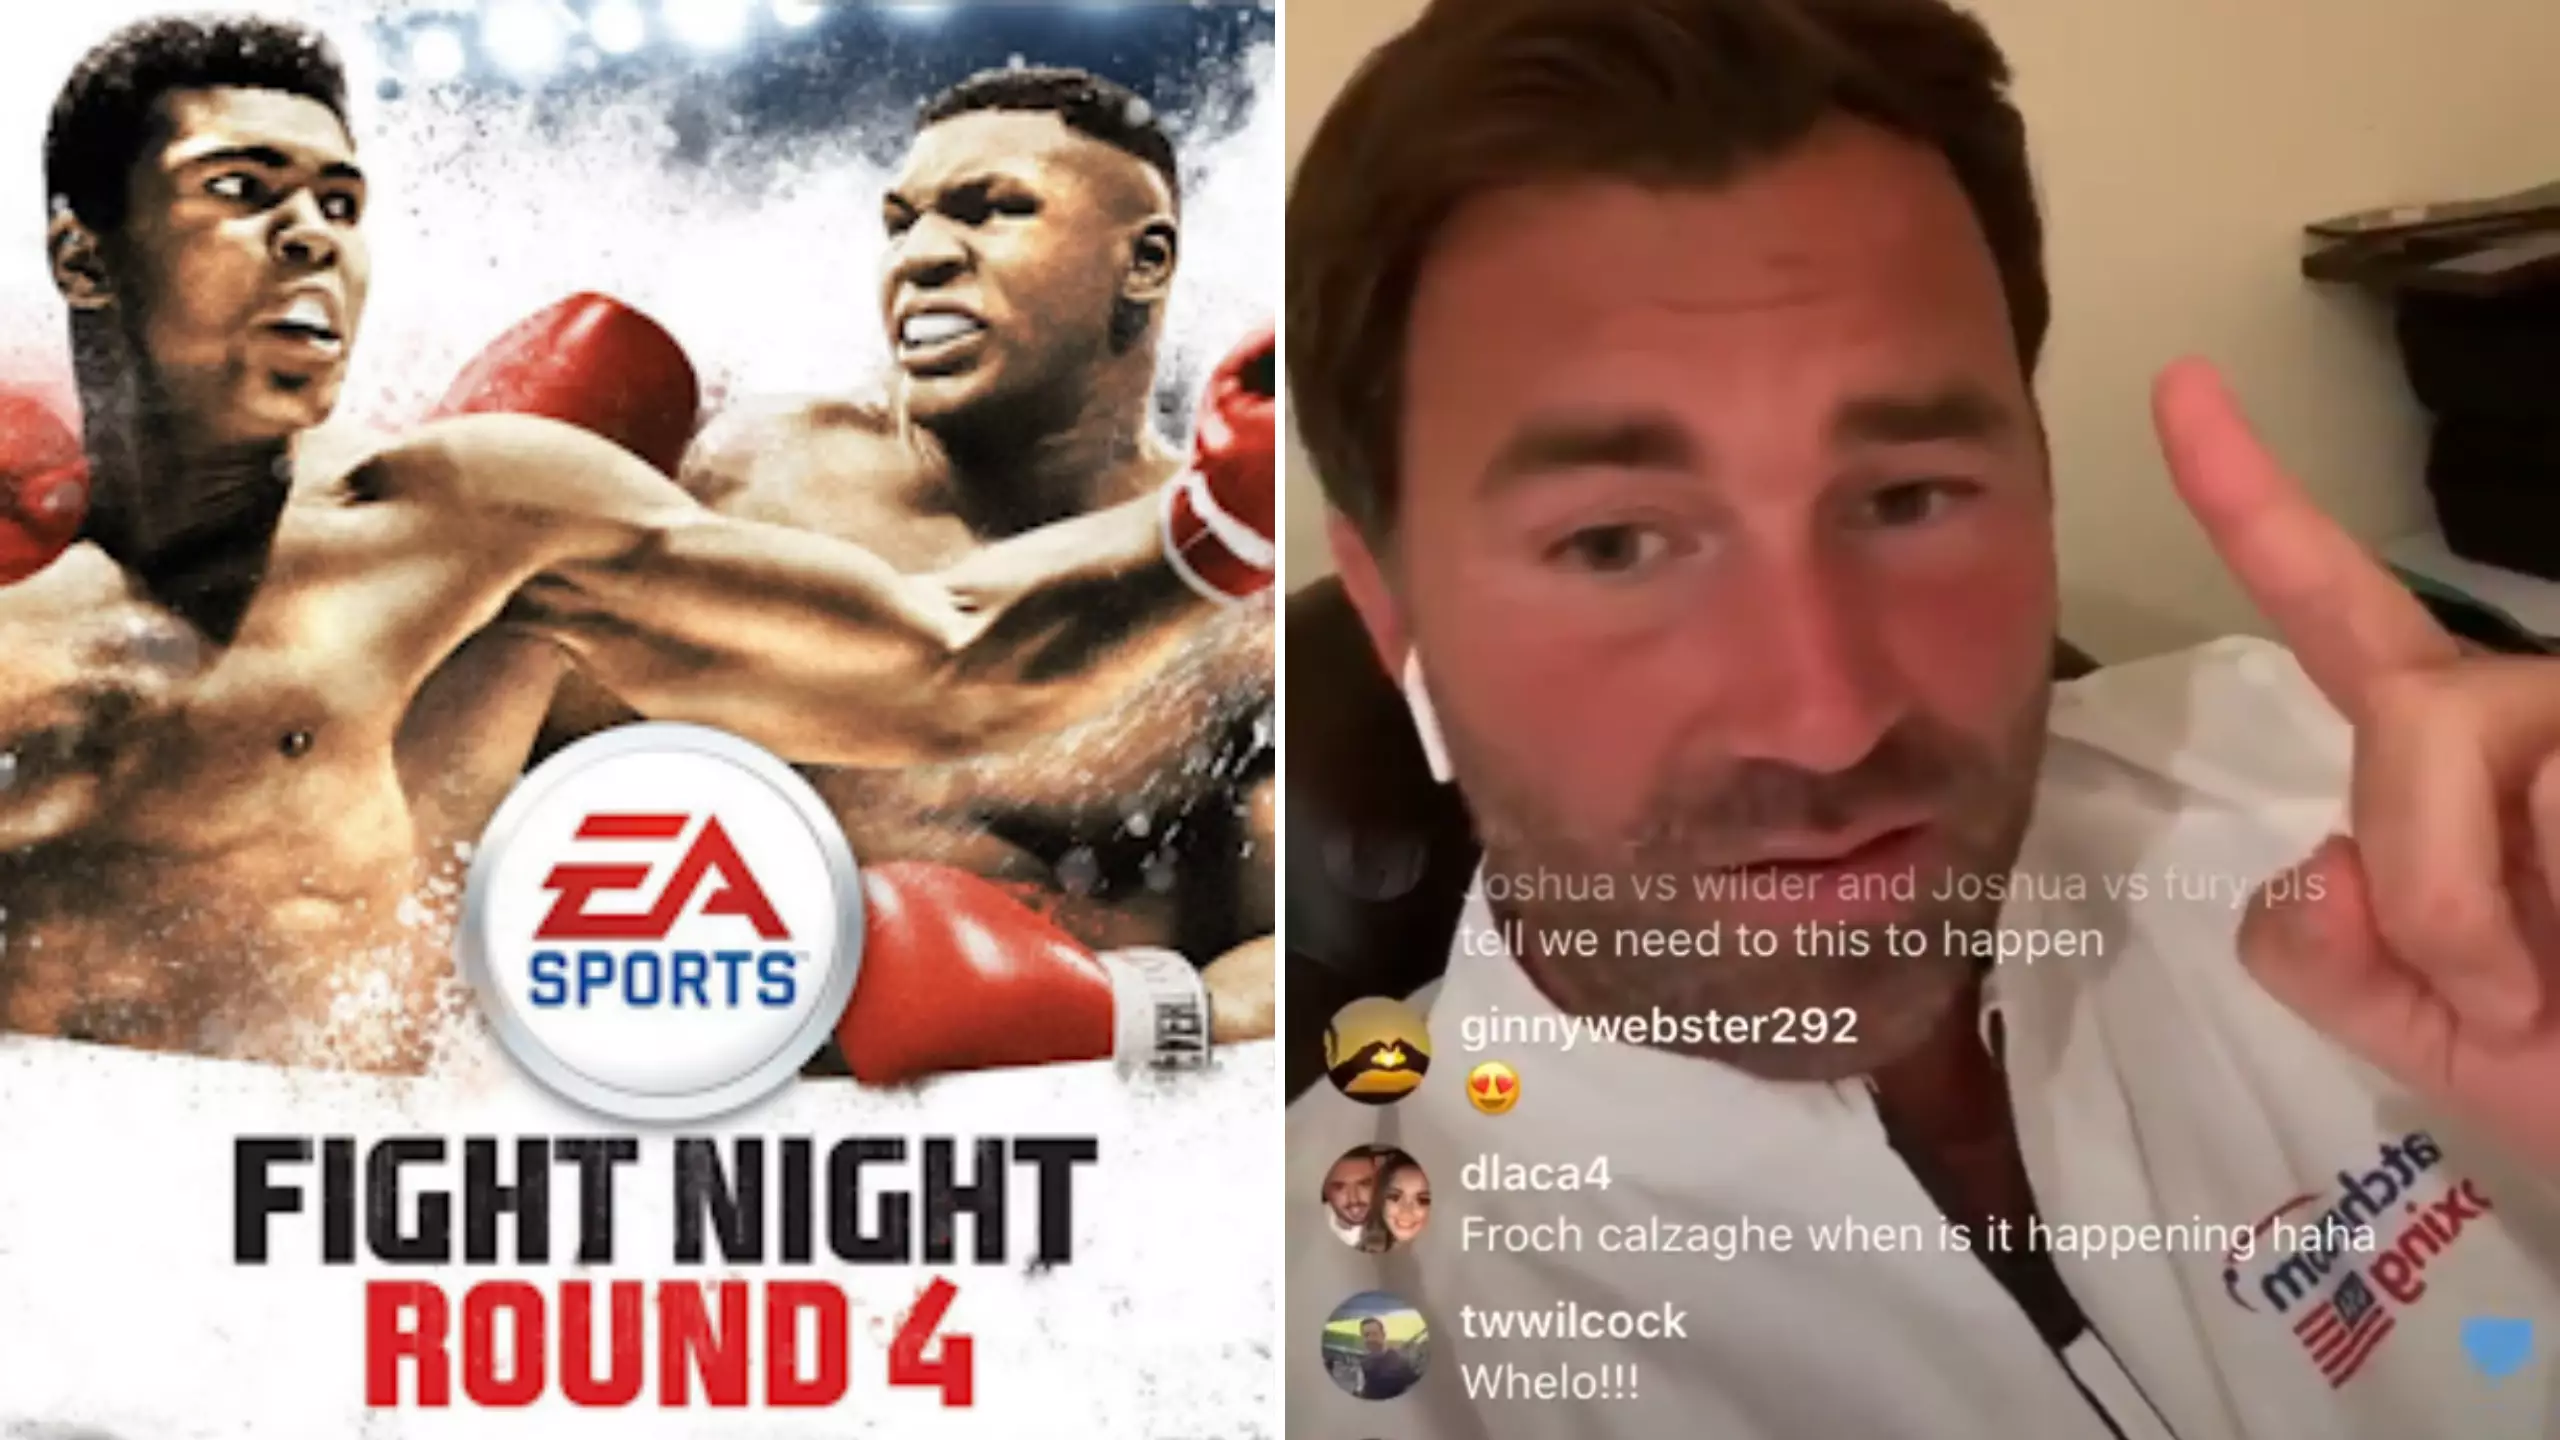 Eddie Hearn Suggests Making His Own Boxing Game To 'Rival Fight Night'